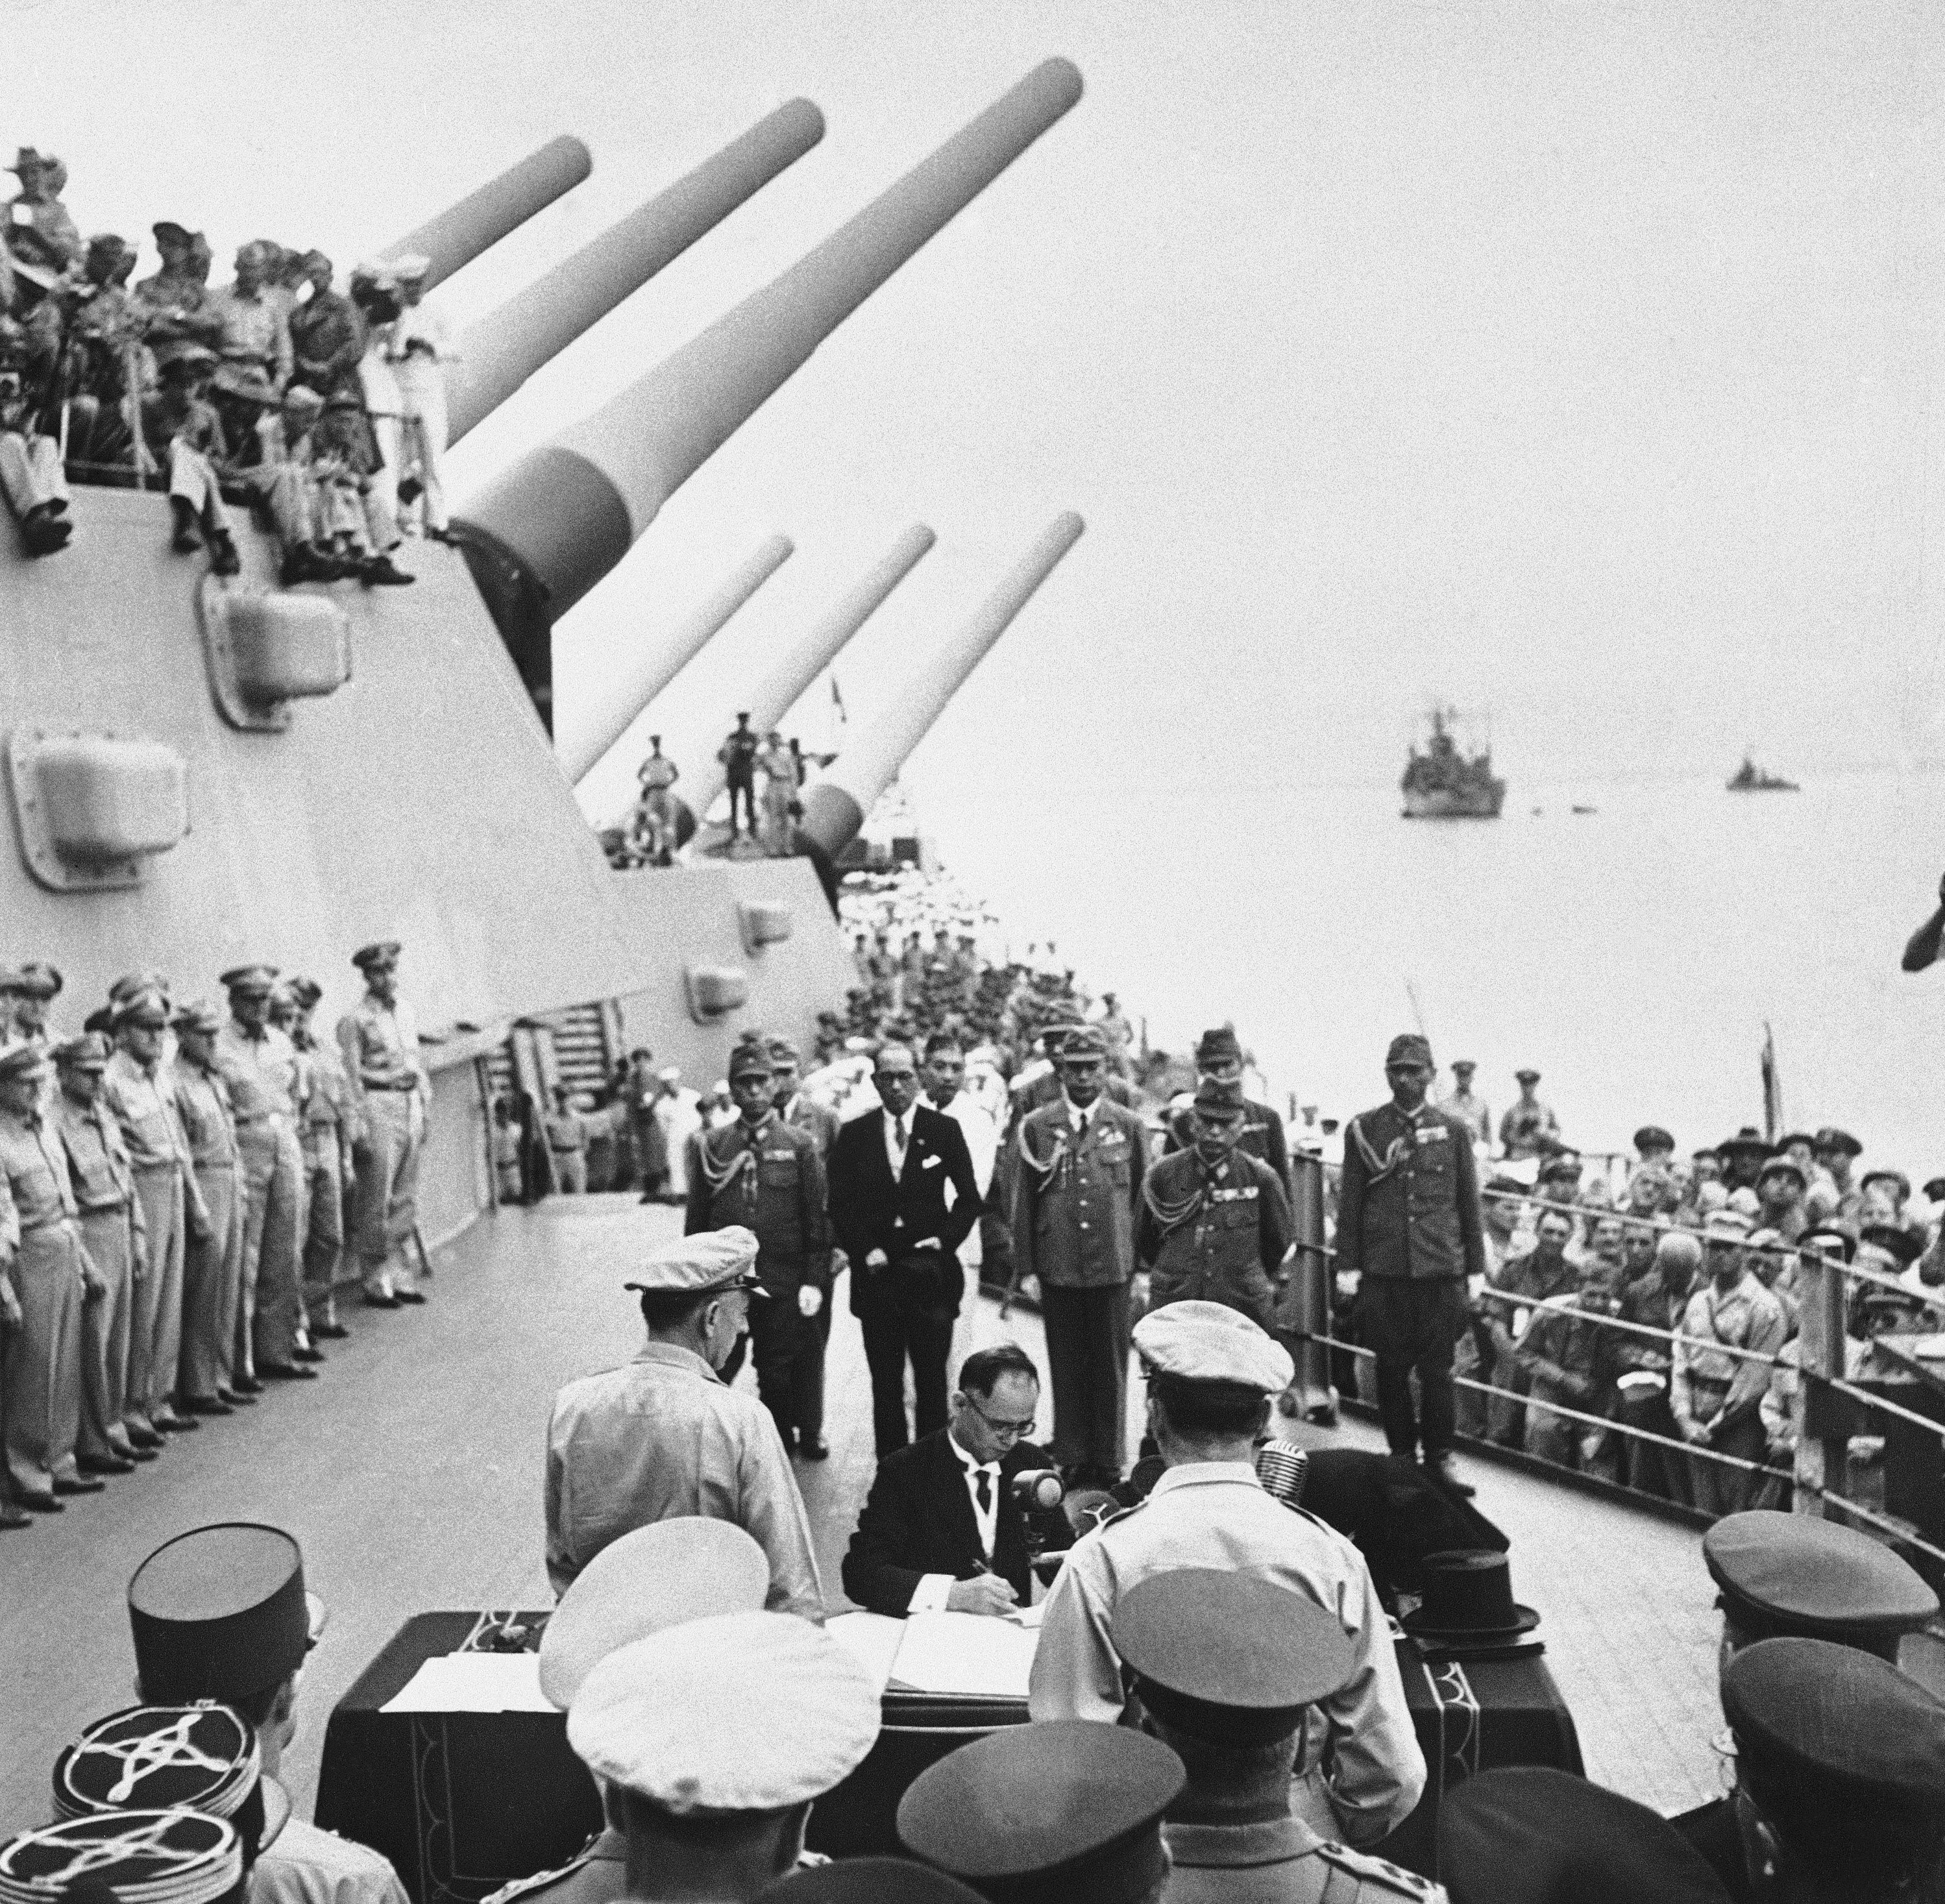 American Fighter Fly in Formation over the Uss Missouri During Surrender  Ceremonies